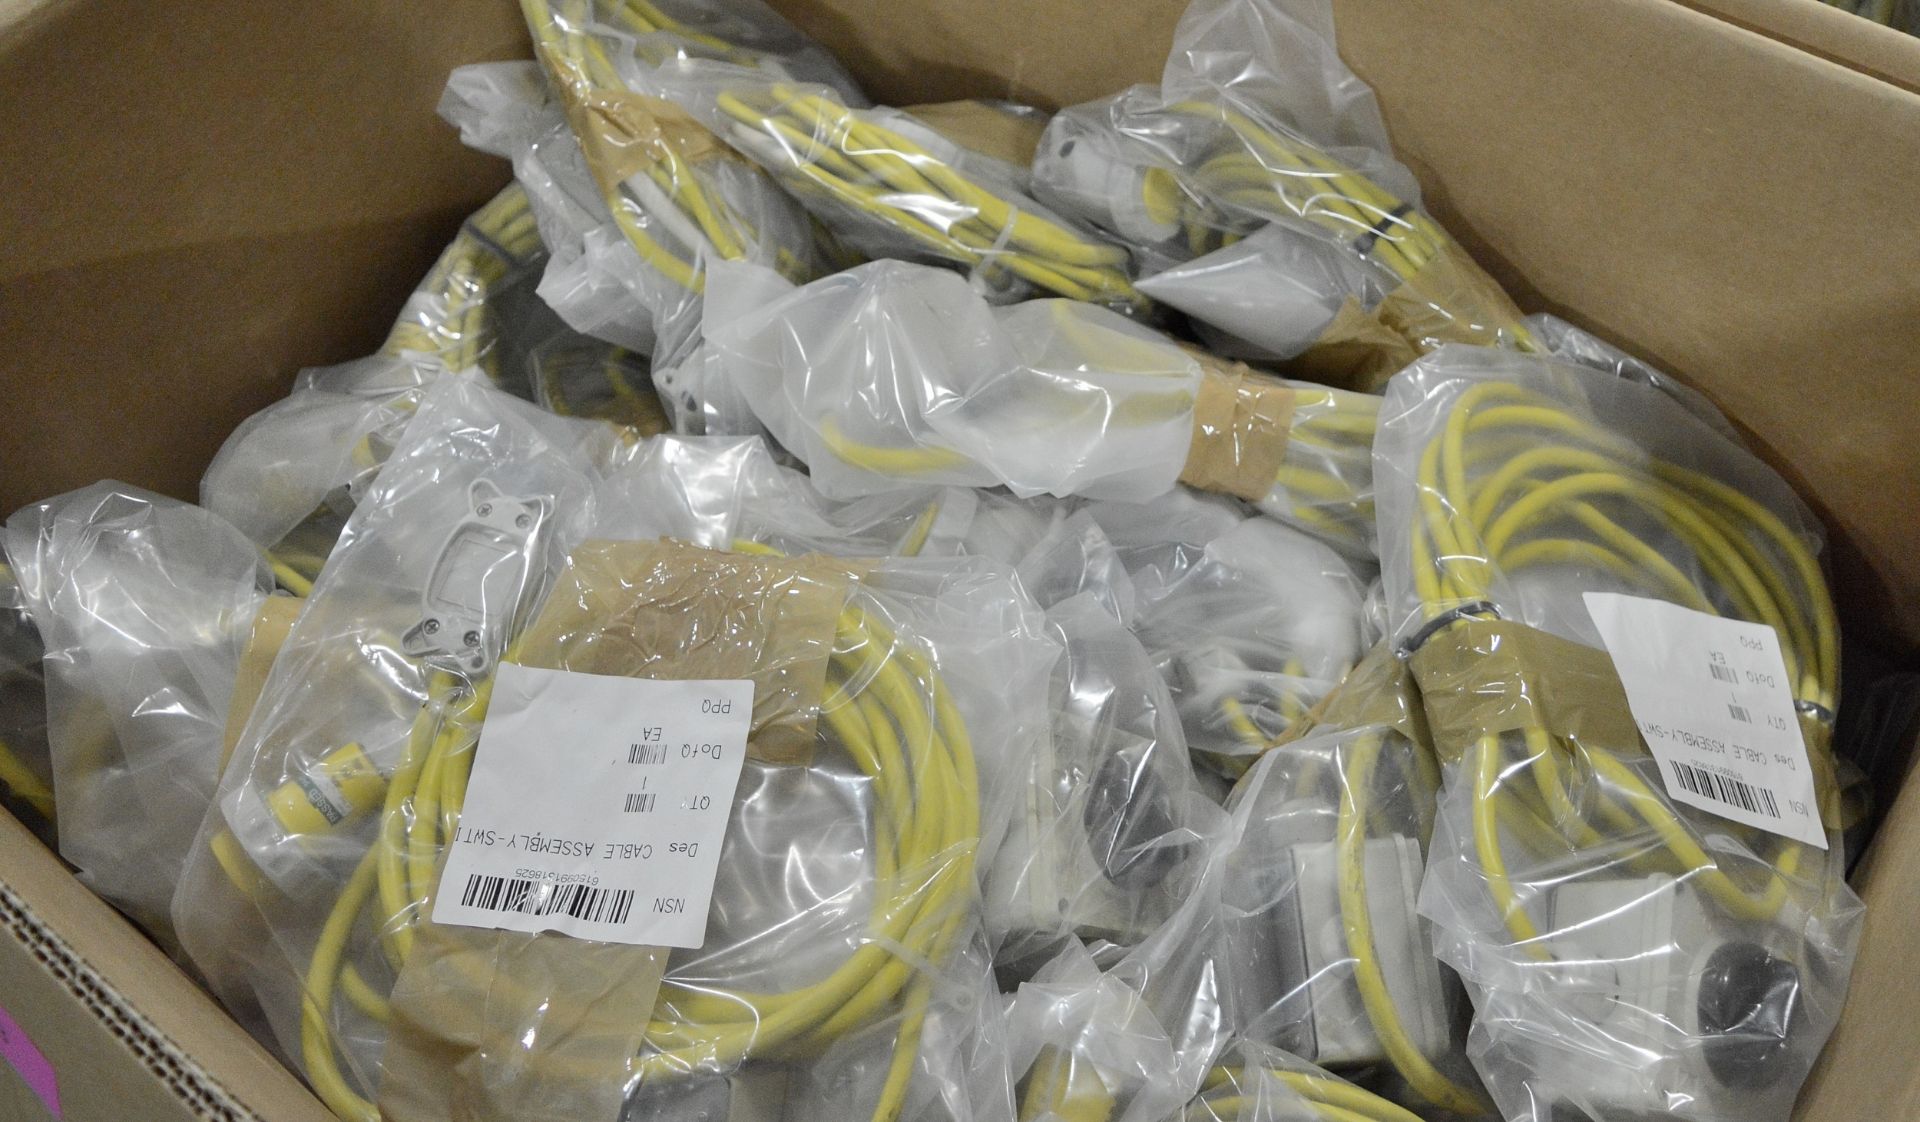 80x Extension Switch Cable Assemblies - 110v - Image 4 of 4